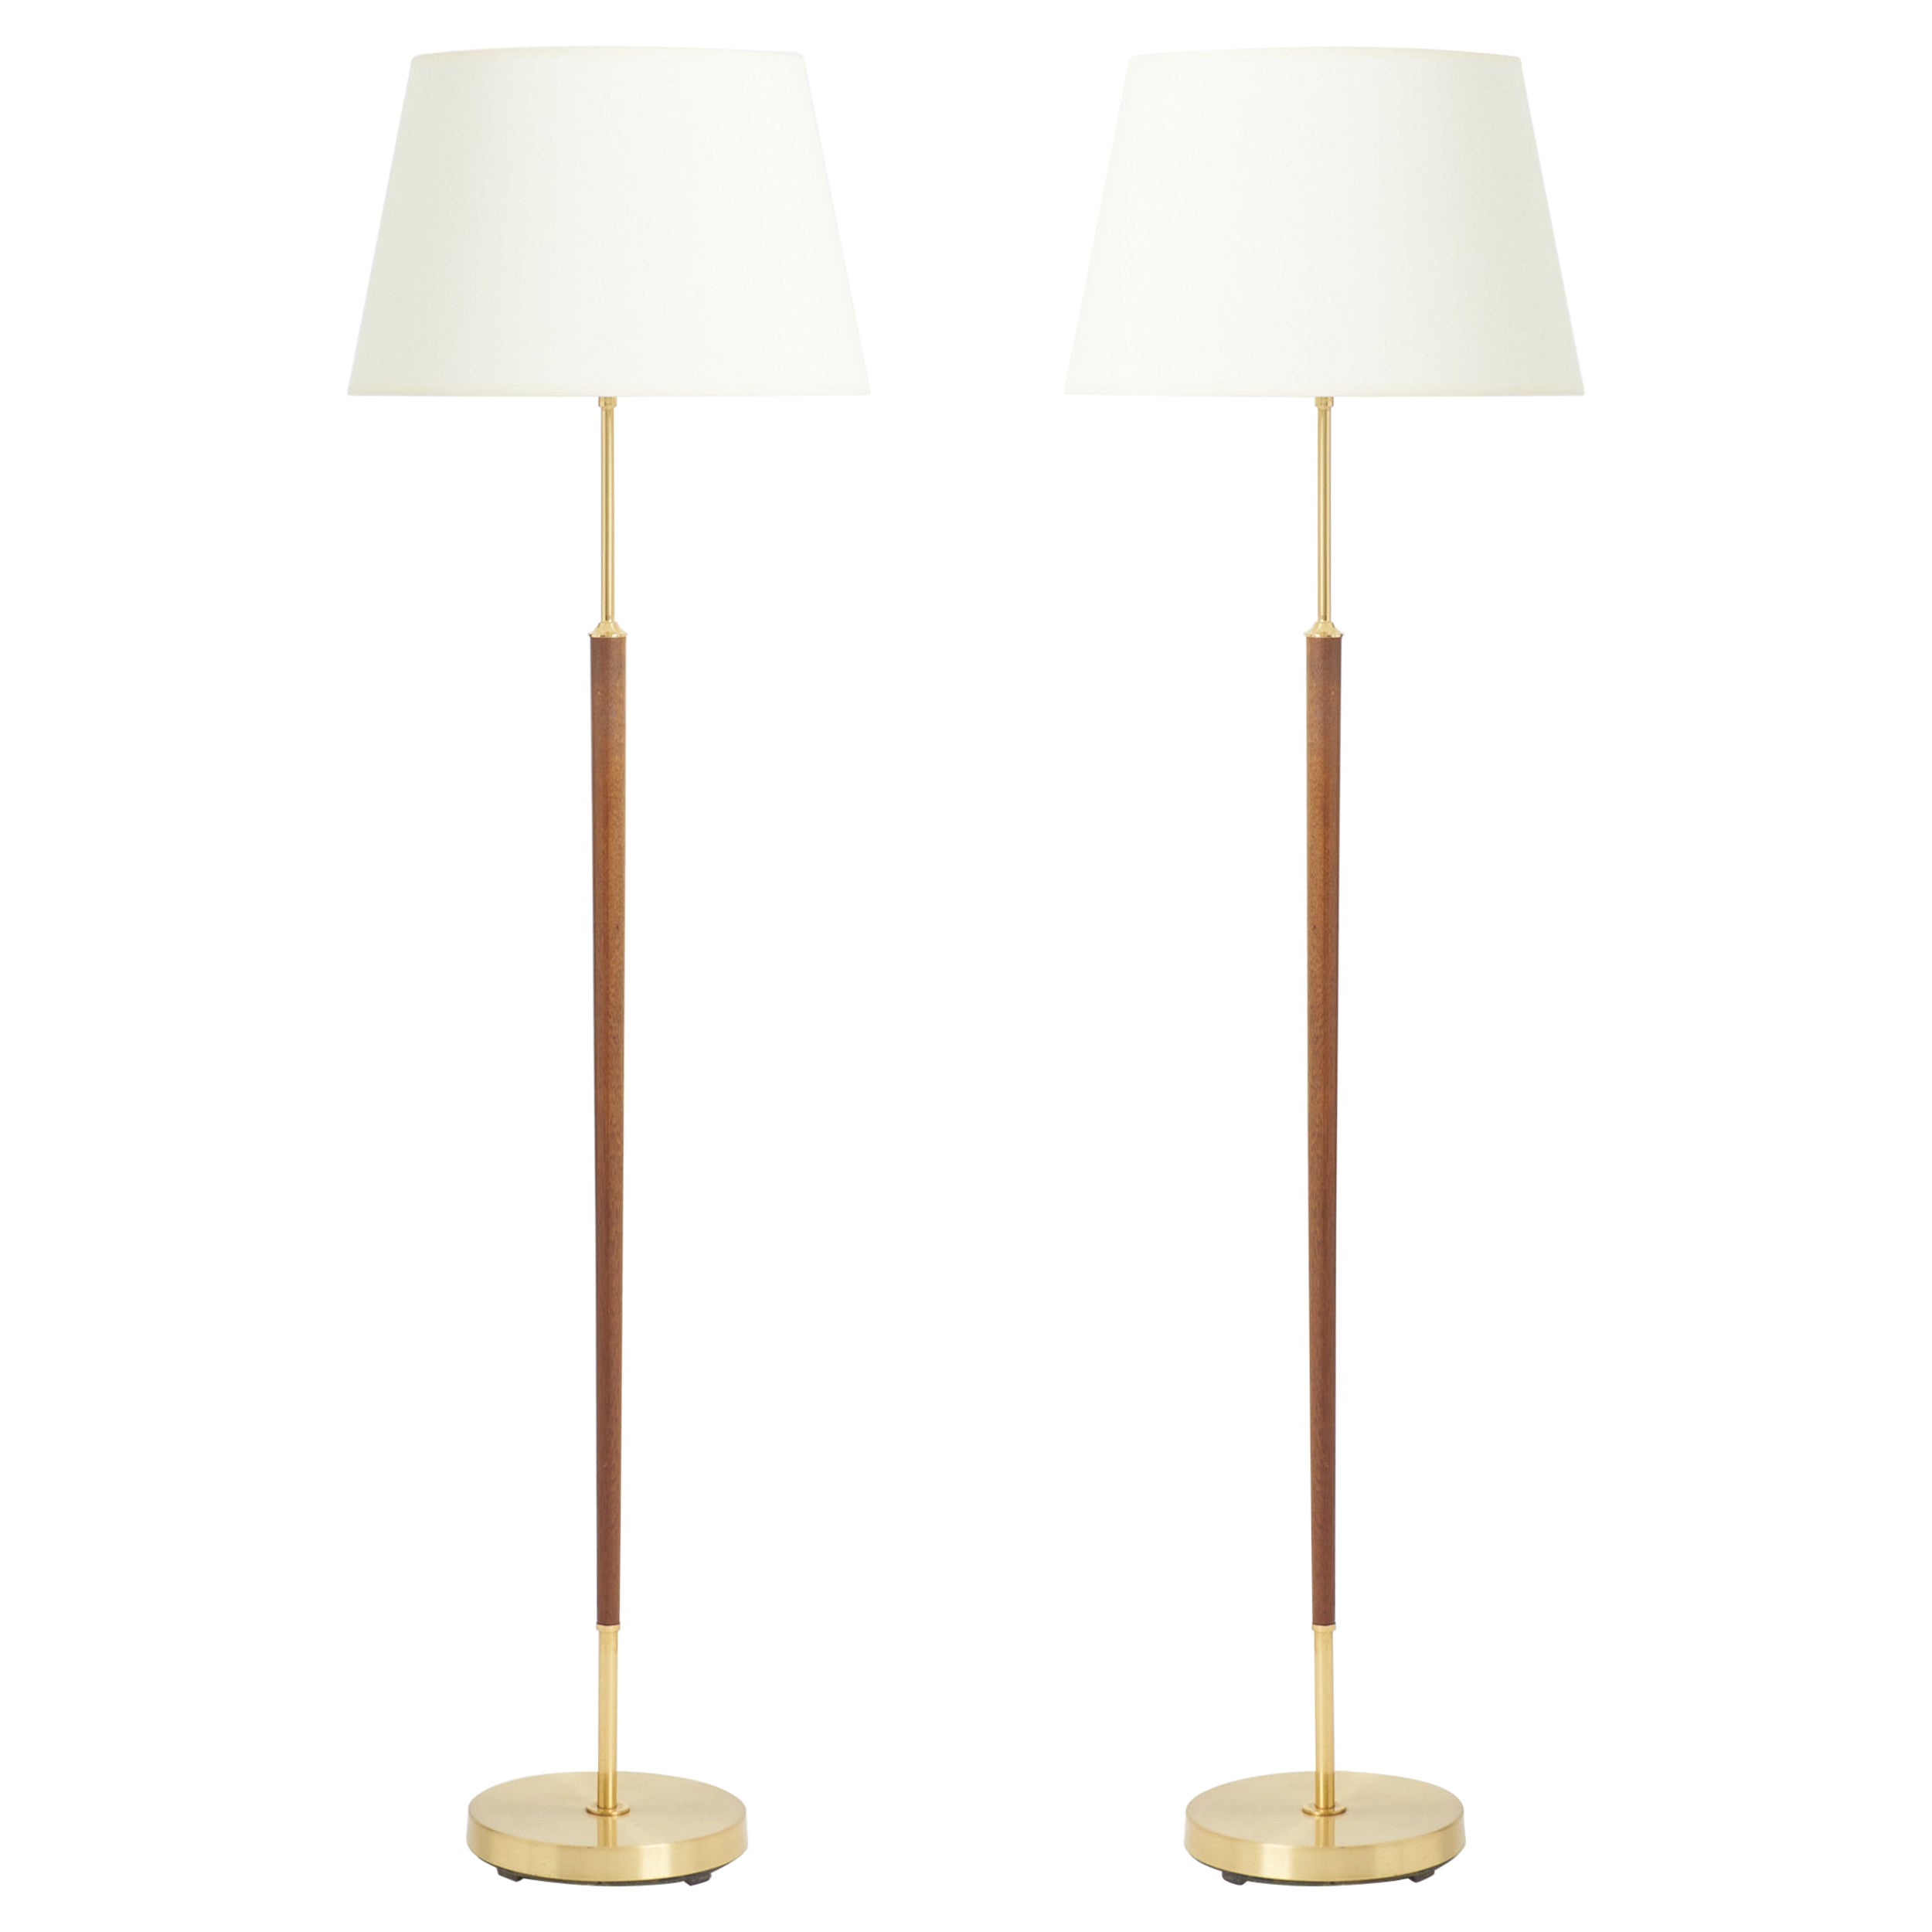 Pair of Brass and Walnut Floor Lamps